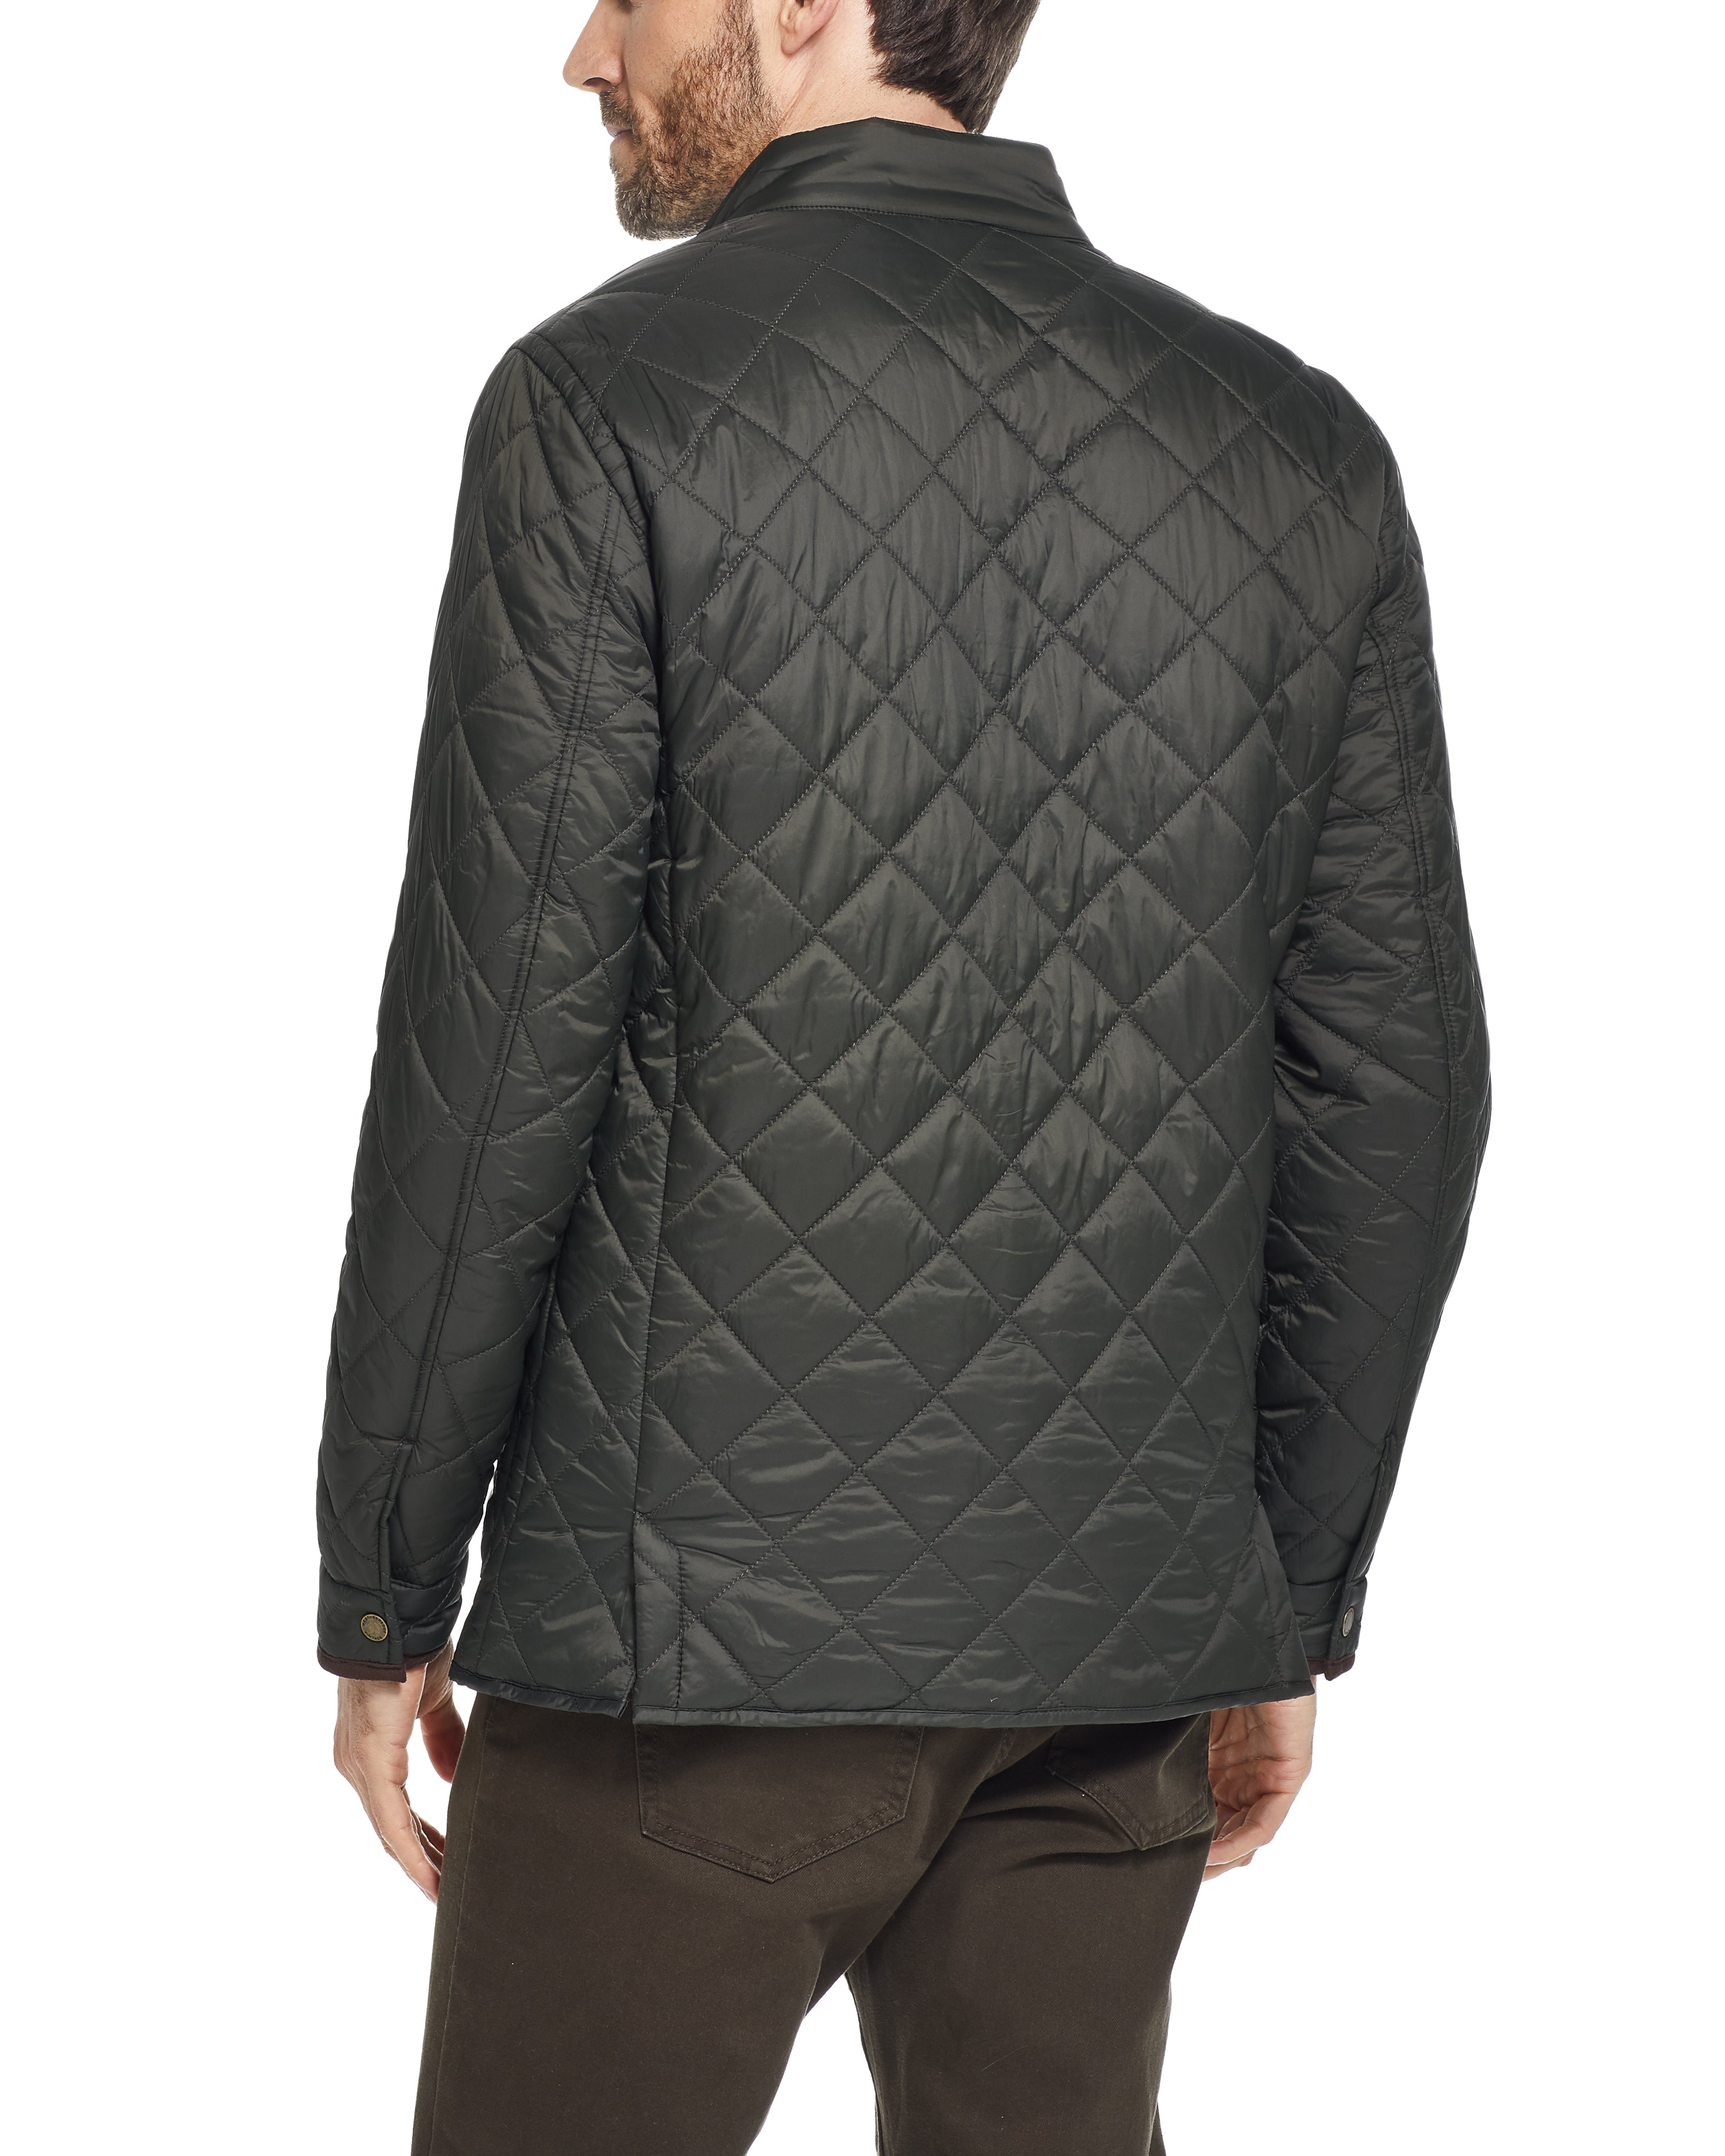 DIAMOND QUILTED WATER RESISTANT NYLON JACKET IN ROSIN